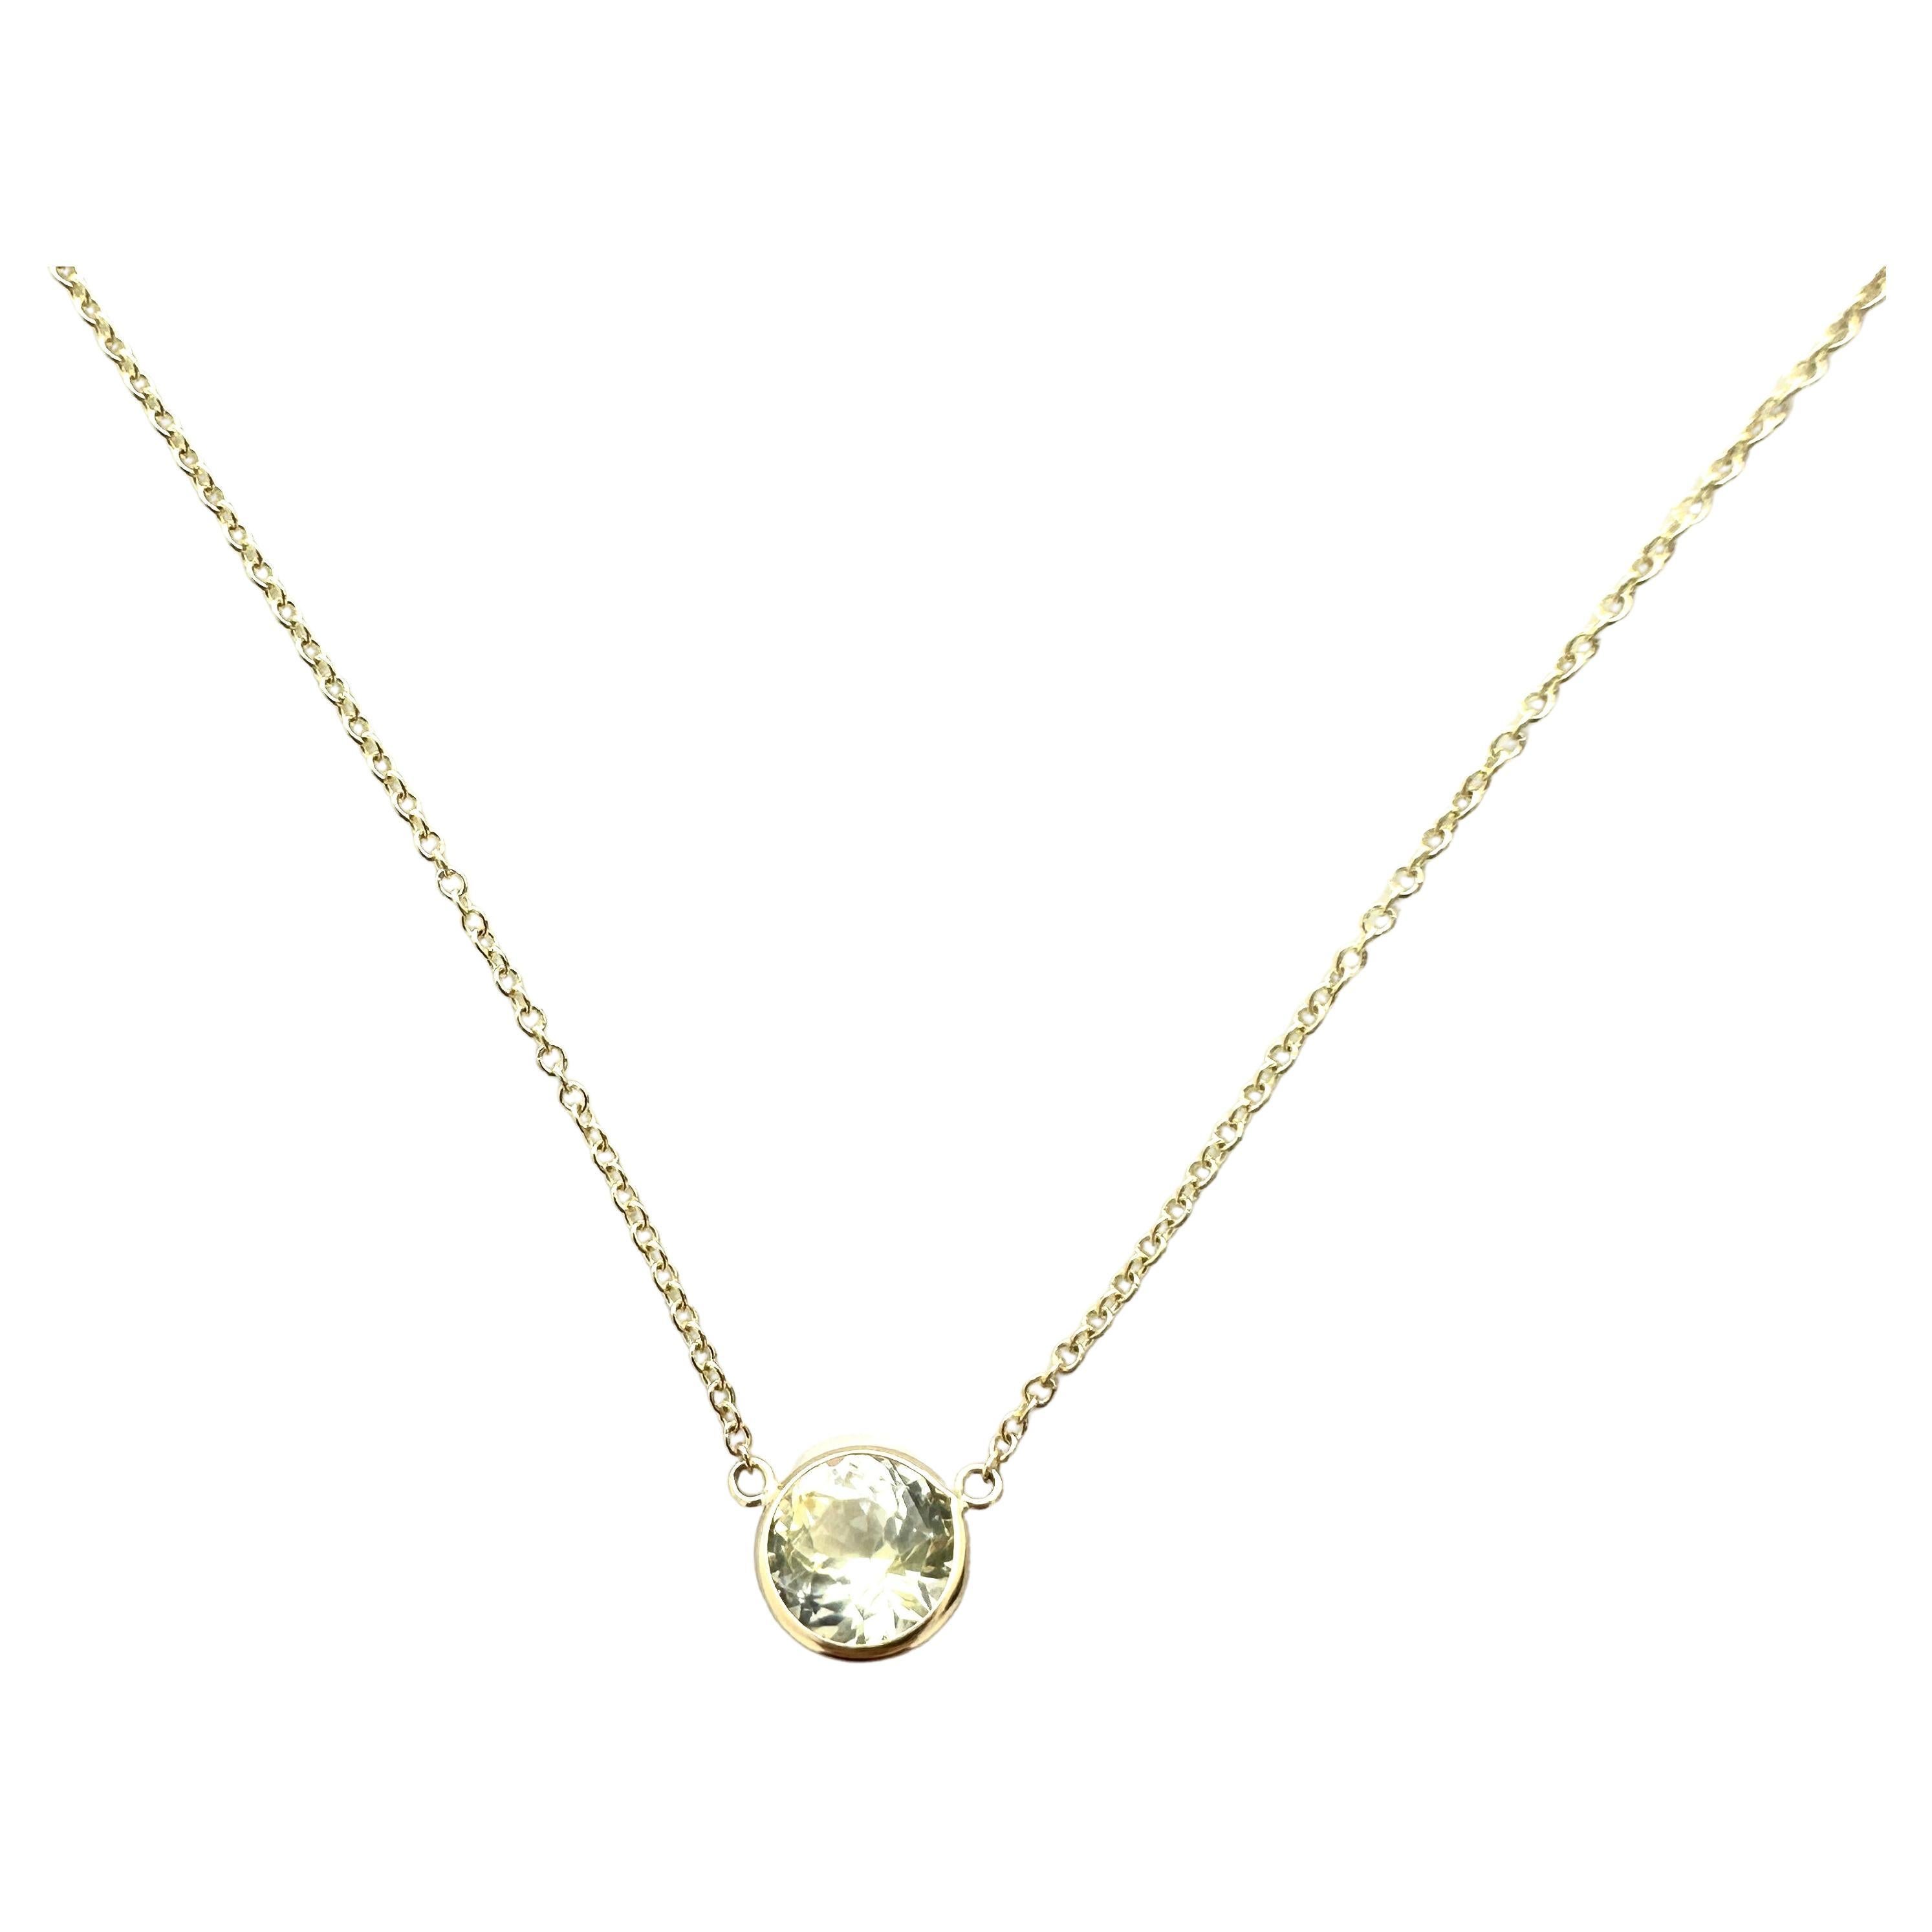 2.35 Carat Weight Yellow Sapphire Round Cut Solitaire Necklace in 14k YG For Sale